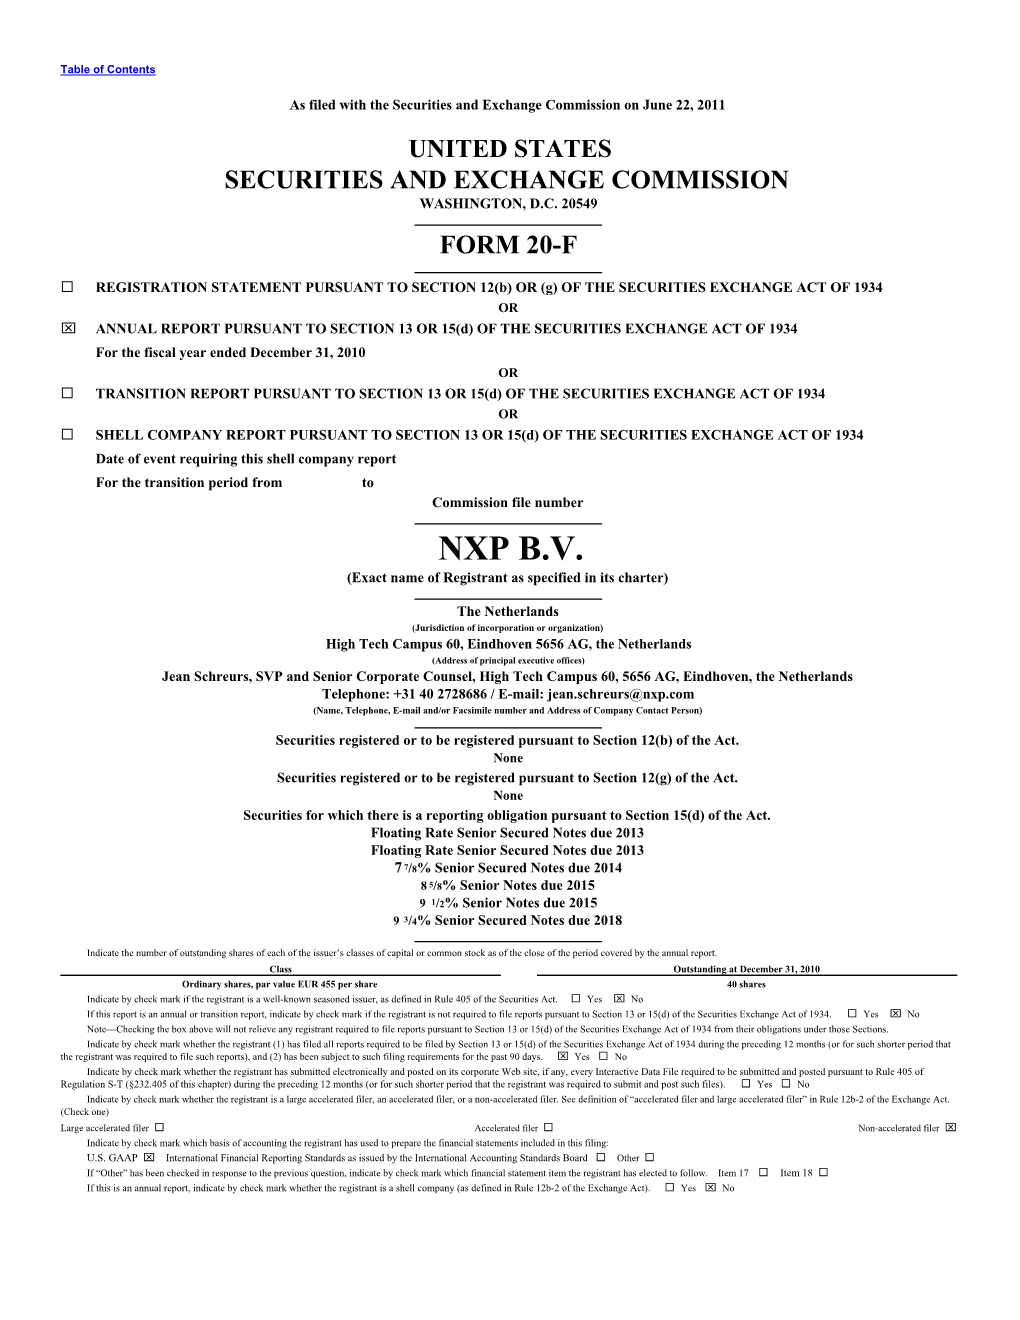 NXP B.V. (Exact Name of Registrant As Specified in Its Charter)